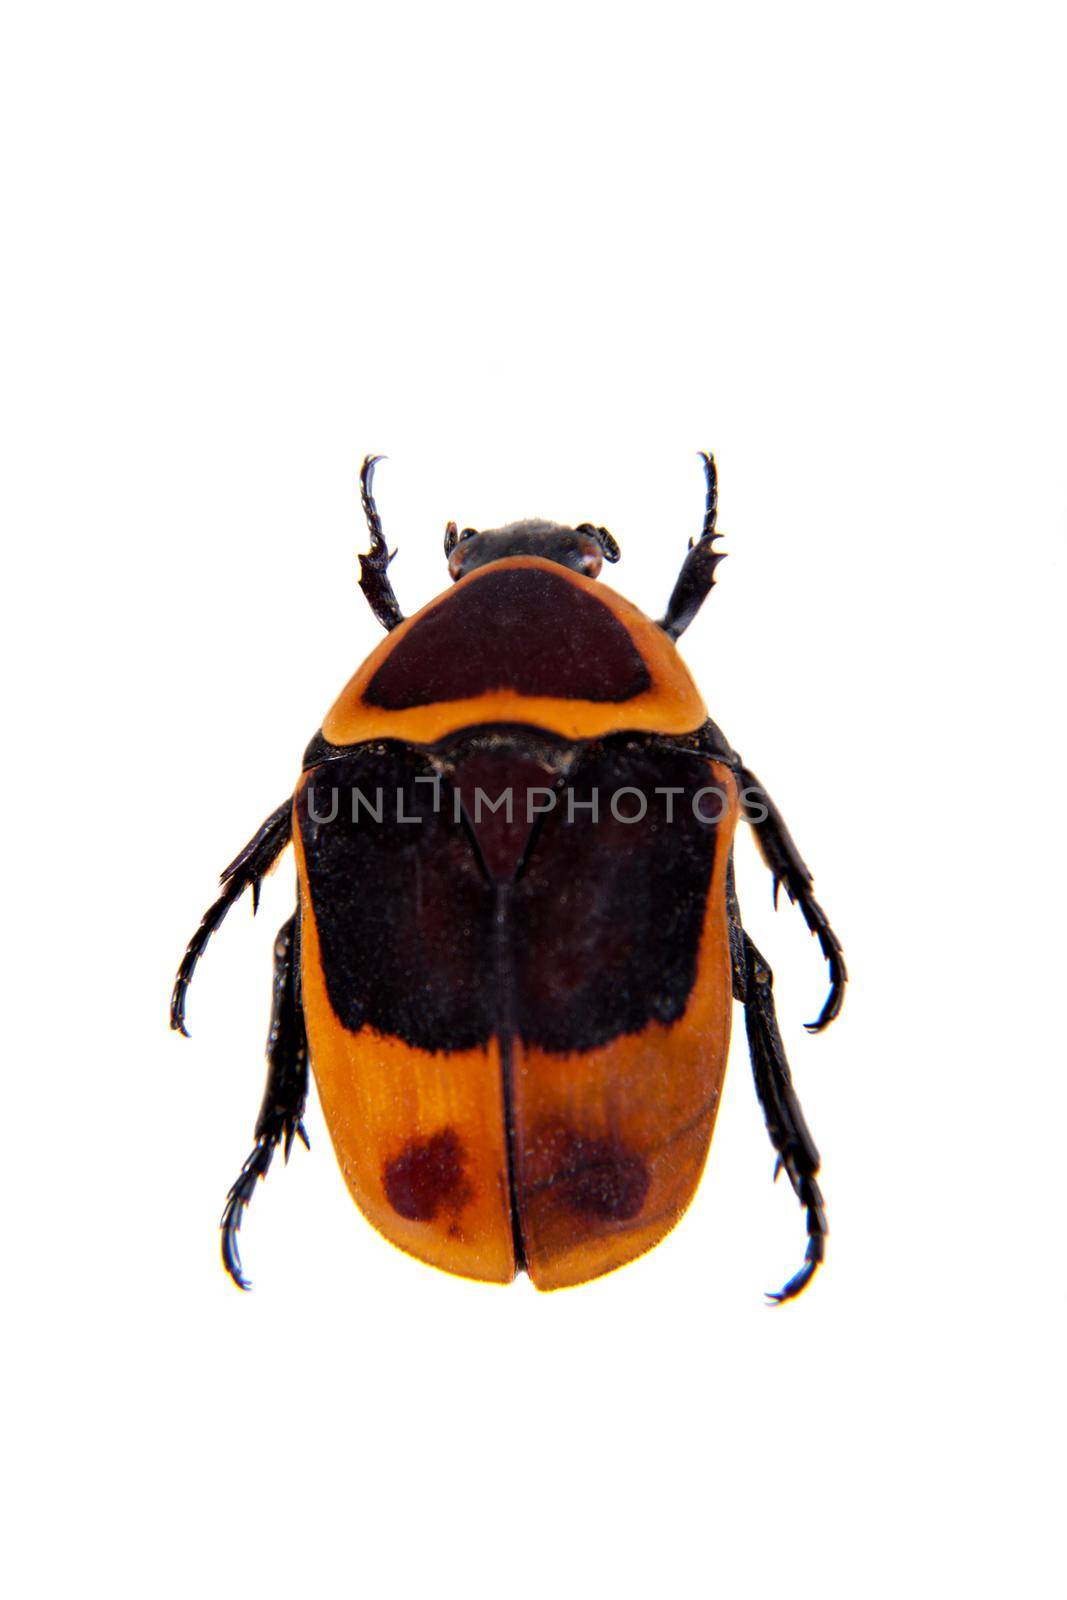 Flower beetle in museum isolated on the white background